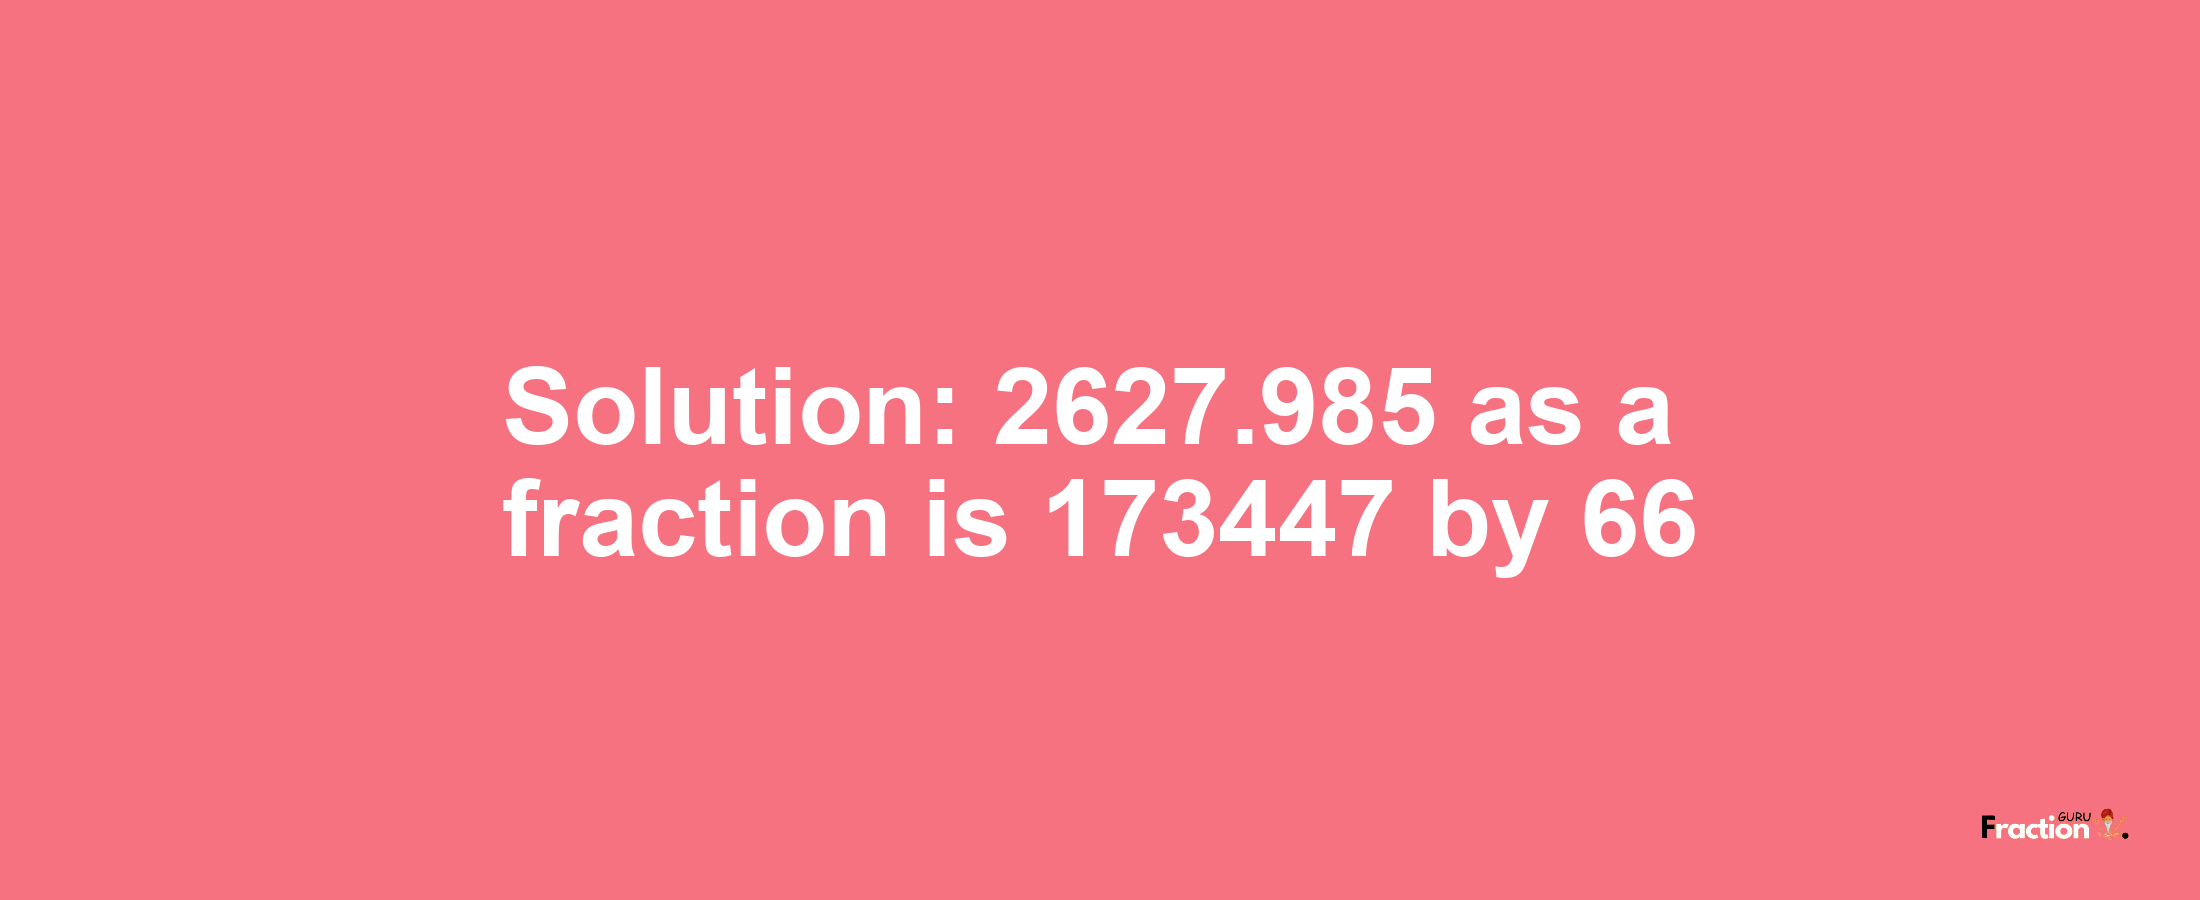 Solution:2627.985 as a fraction is 173447/66